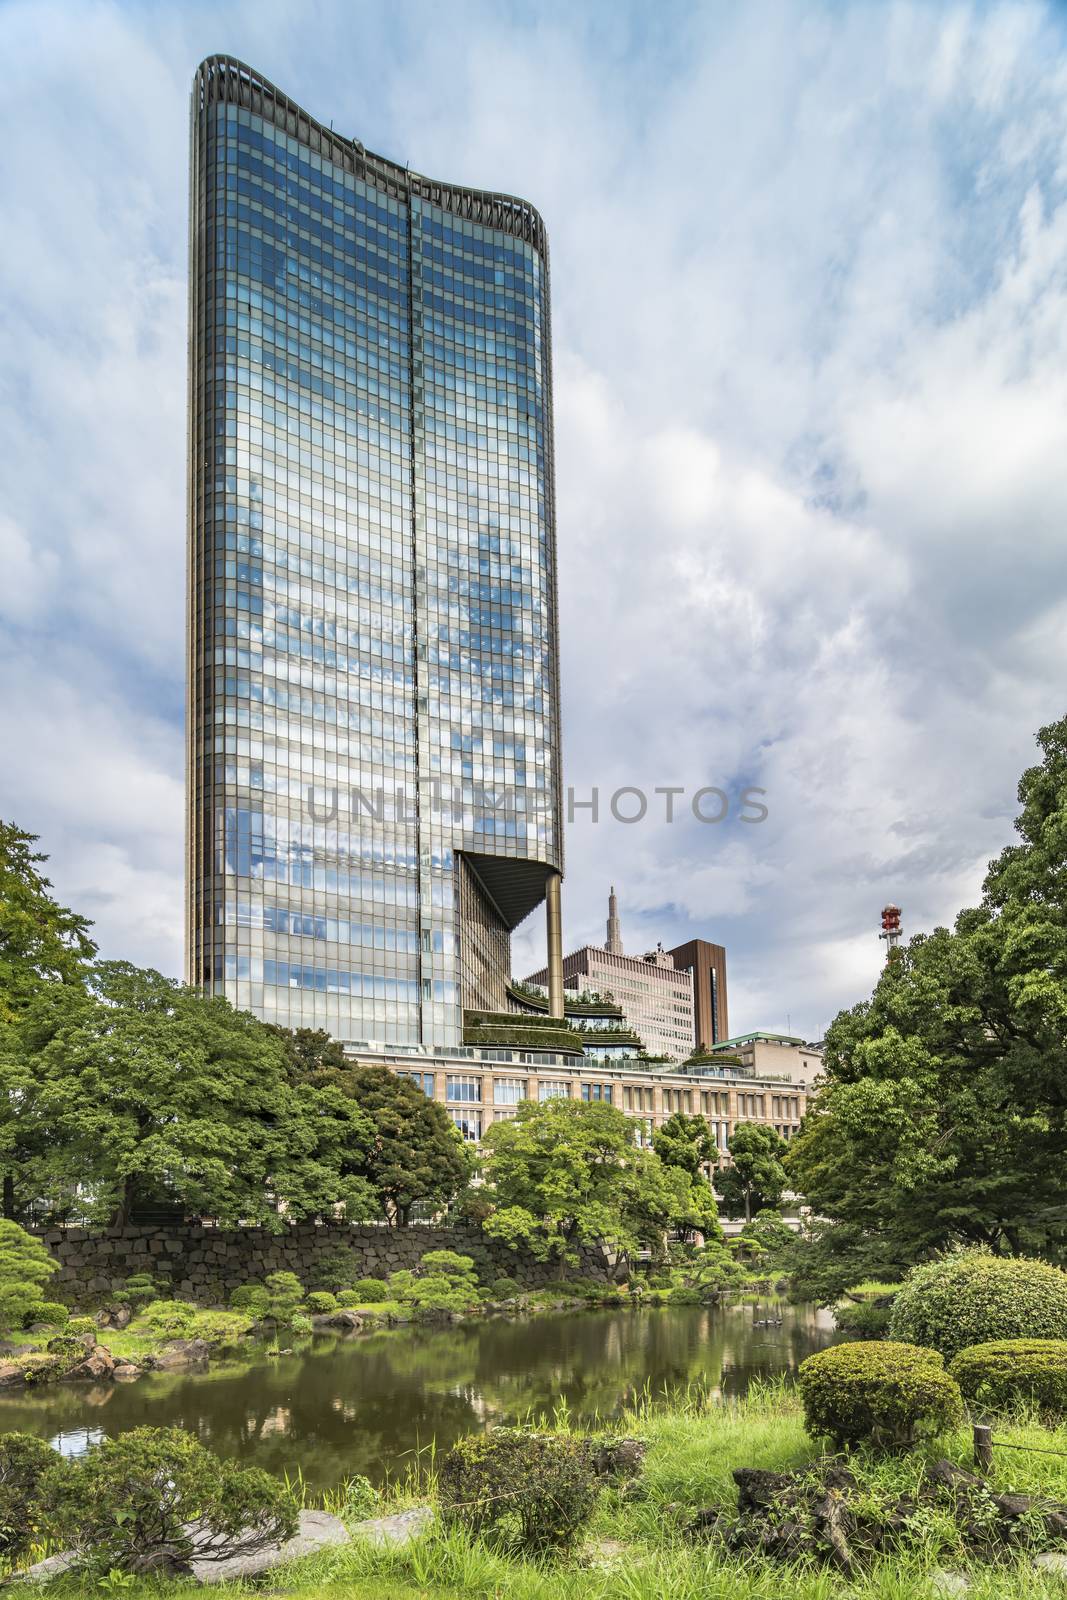 View from the Hibiya public park of the Tokyo Midtown Hibiya building located in the Yurakucho district in Tokyo, Japan.  Completed in March 2018, the project includes office, commercial, and dining and entertainment facilities. The building’s concave glass exterior facing Hibiya Park produces noticeable solar glare onto the streets immediately to the south of the building echoing one of the design flaws of London’s 20 Fenchurch Street skyscraper.